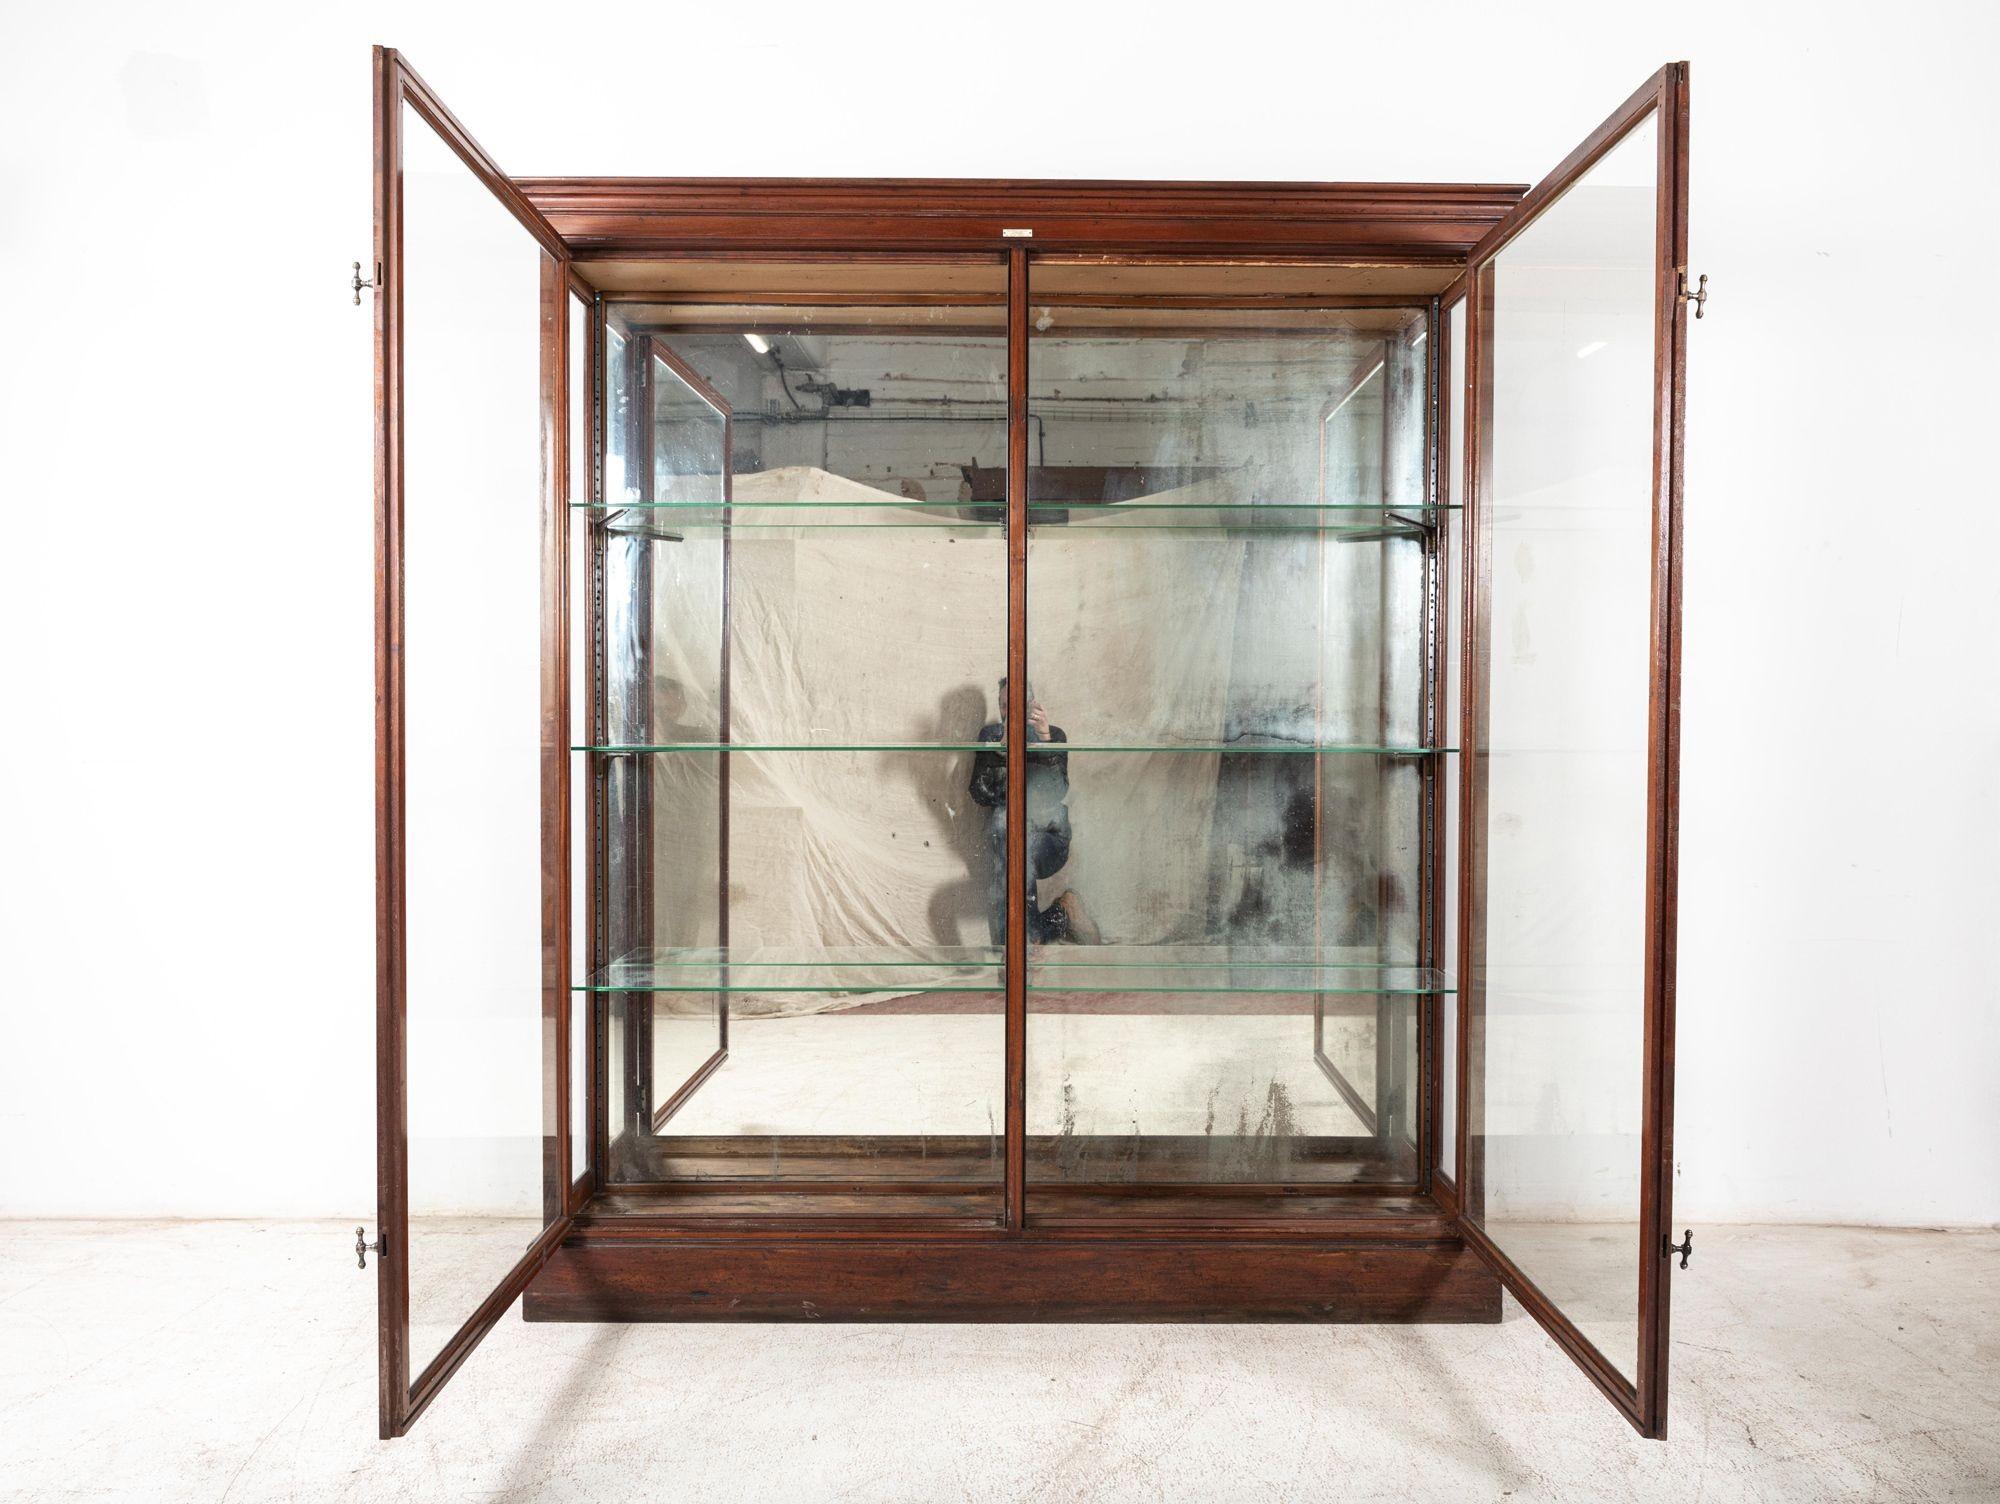 Circa 1890

19th C English glazed mahogany shop fitters display cabinet with original brass T bar handles, foxed mirror, glass shelves & hardware.

Excellent quality by ‘Frederick Maund’ shop fittings of 141 Old Street, London.

Medium